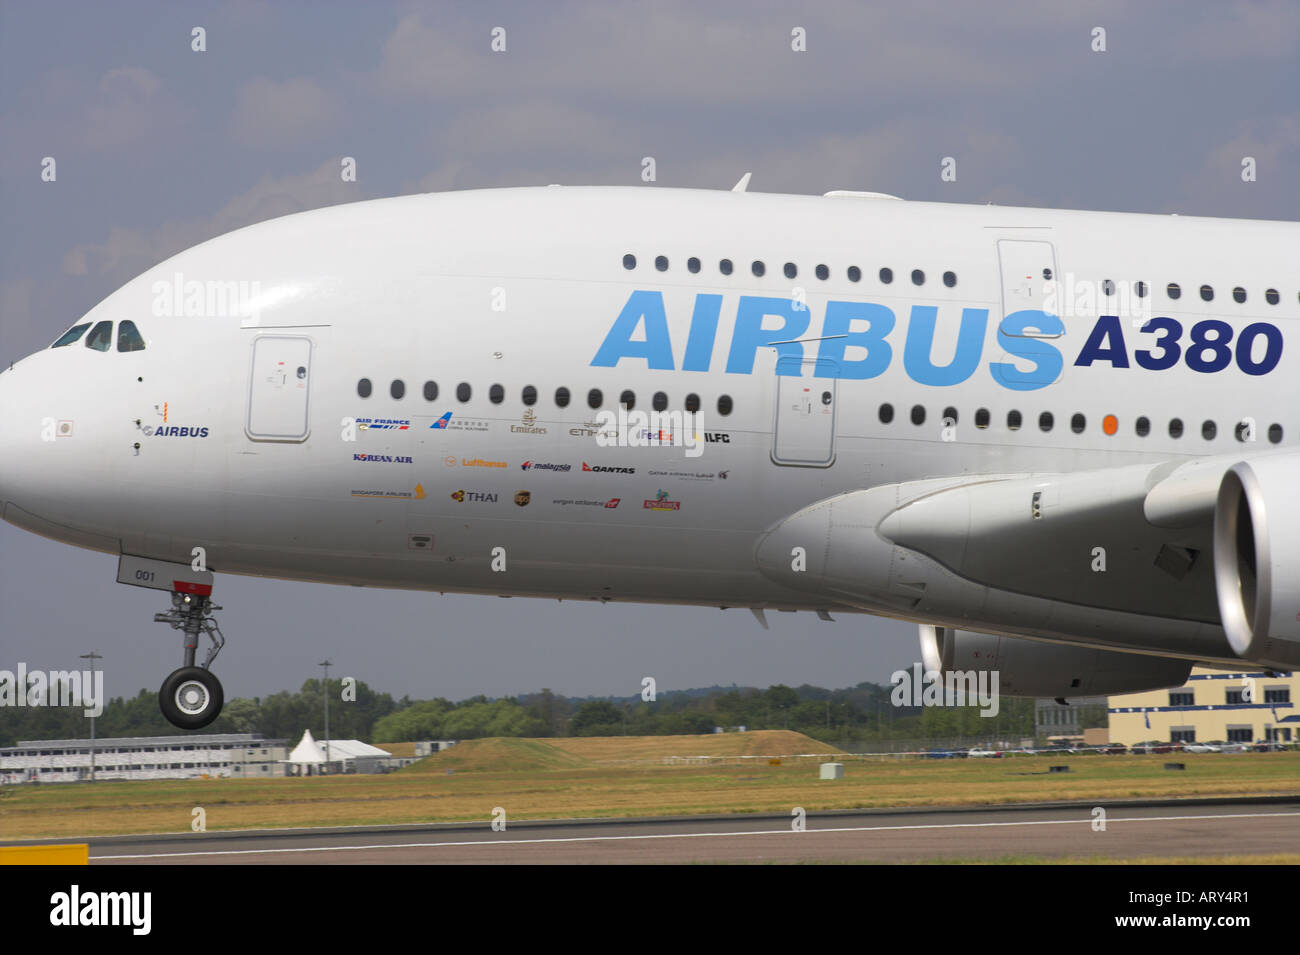 Forward fuselage and nosewheel of Airbus A380 during touchdown Stock Photo